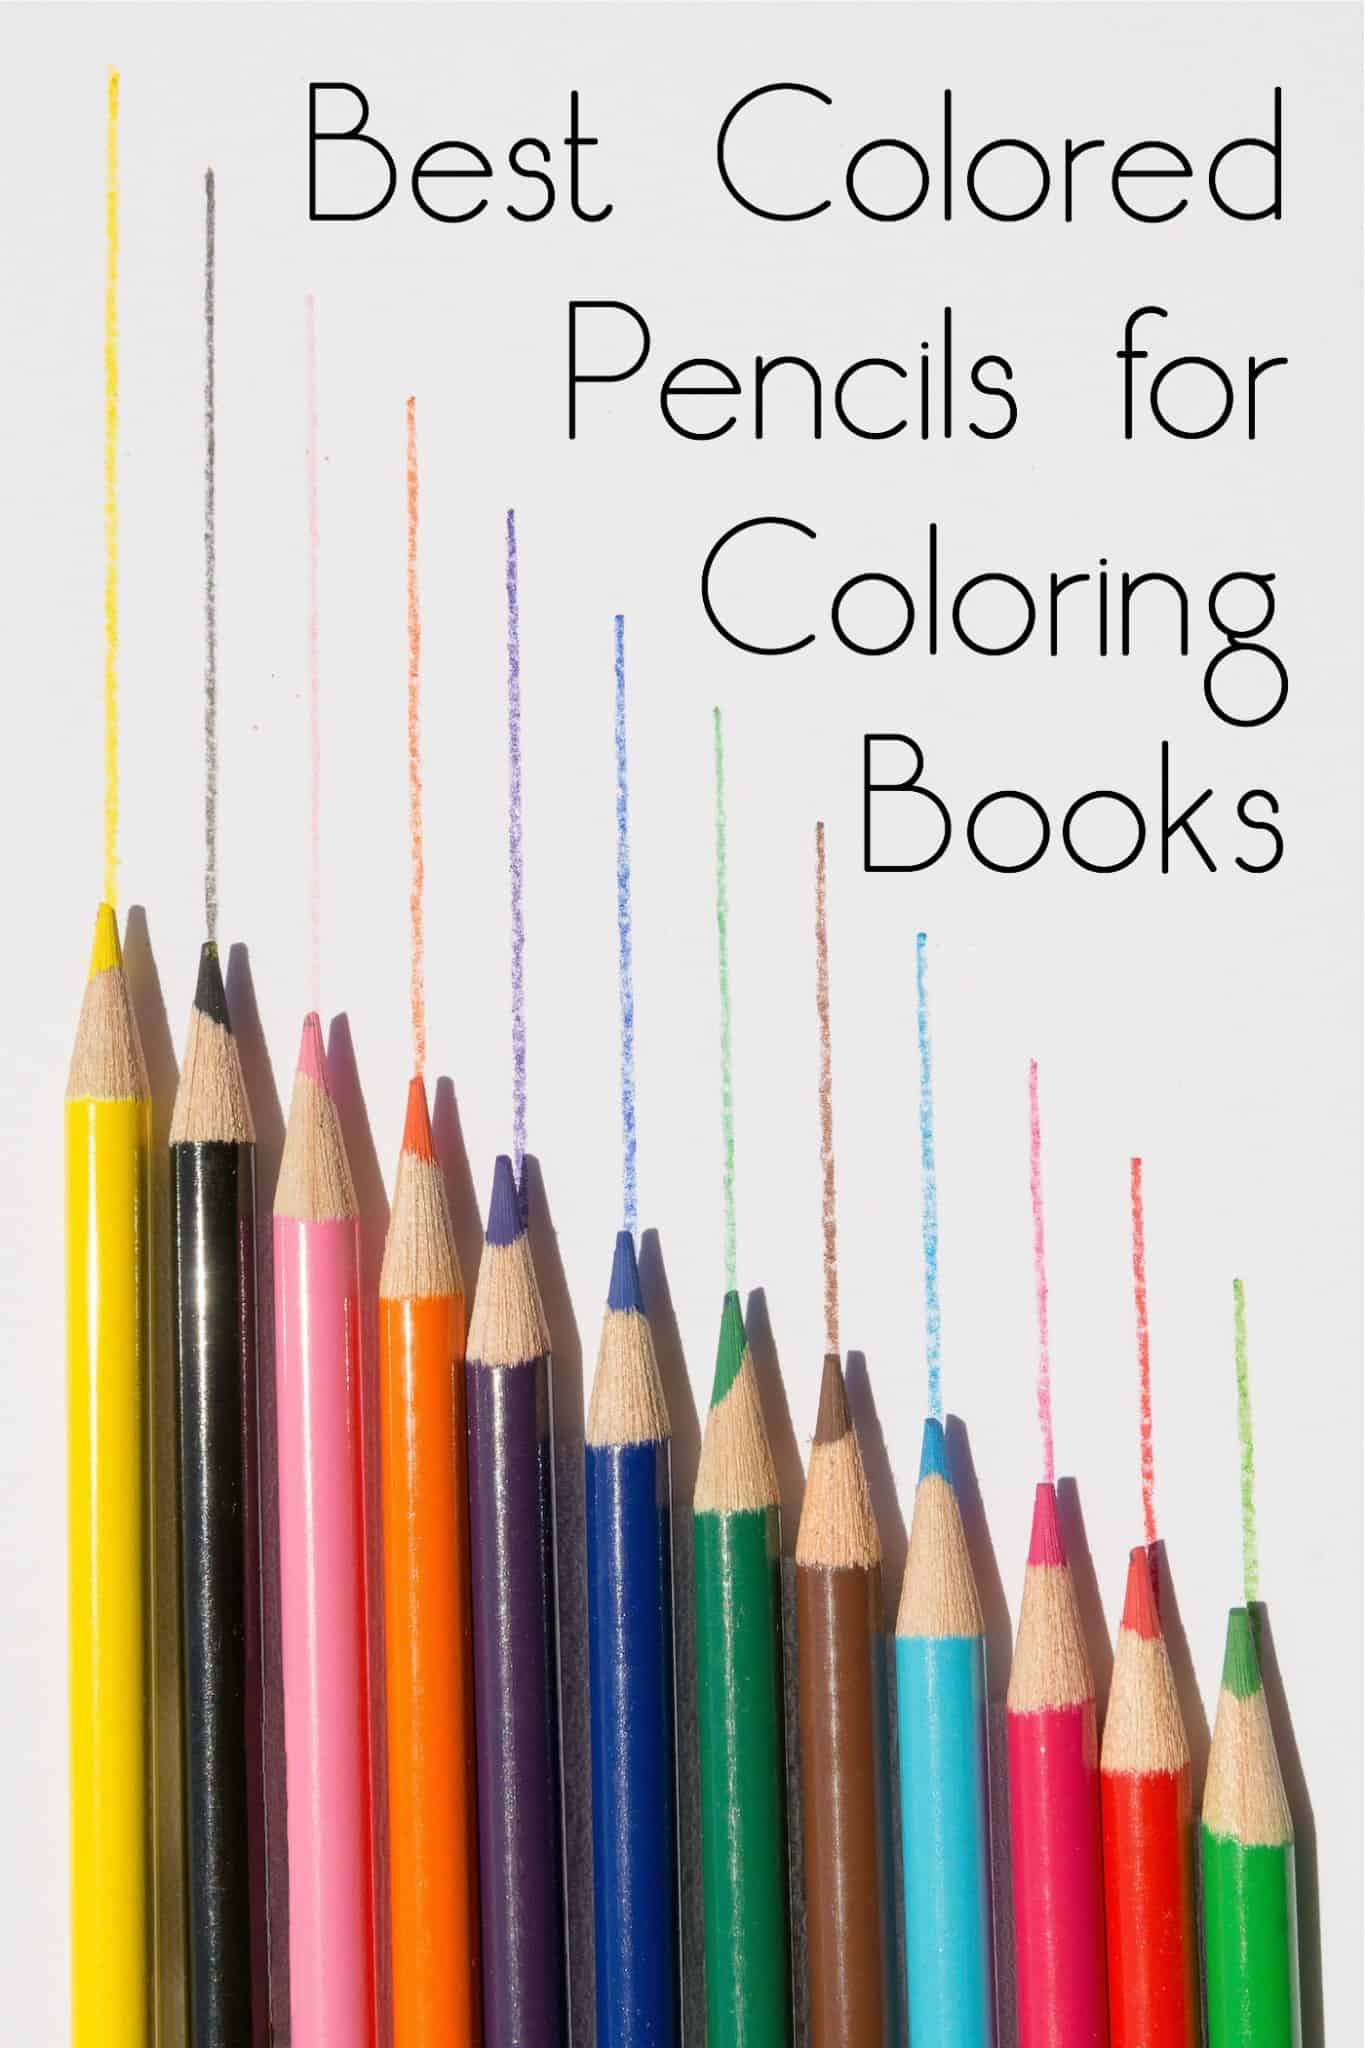 Adult Coloring Books And Pencils
 Best Colored Pencils for Coloring Books diycandy